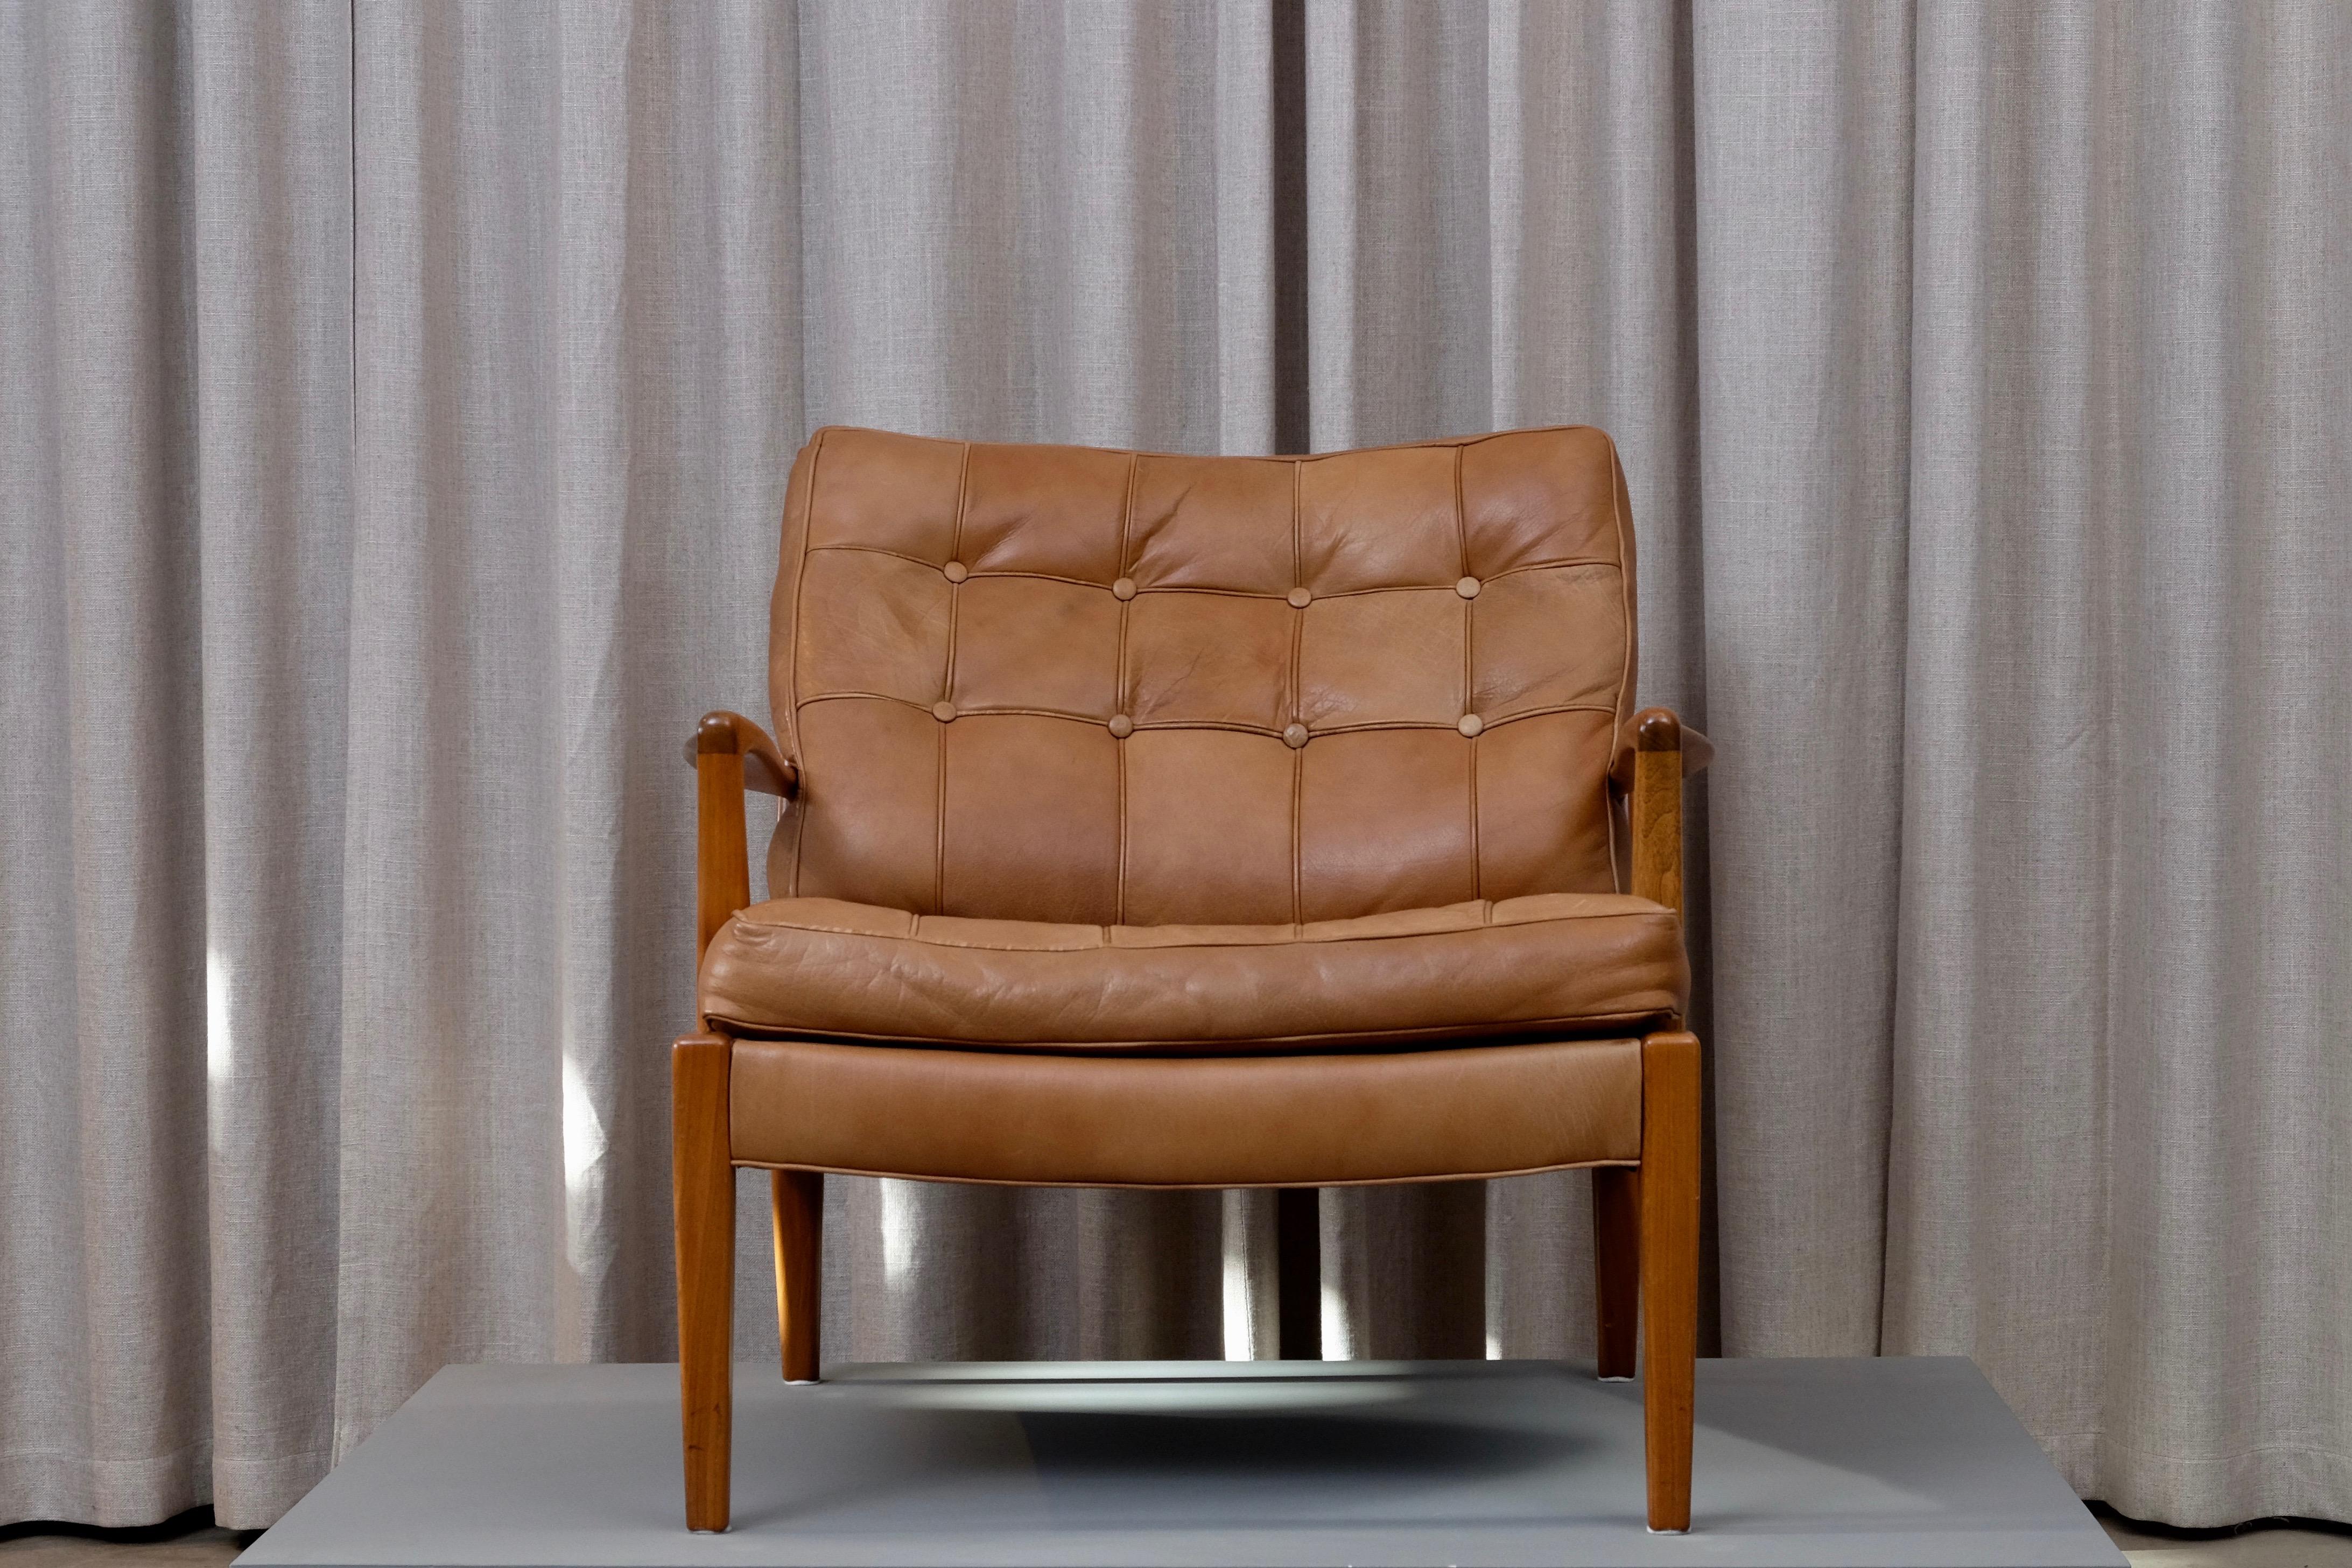 Easy chair model Löven designed by Arne Norell. Produced by Arne Norell AB in Aneby, Sweden, 1960s. Original buffalo leather. Excellent condition.